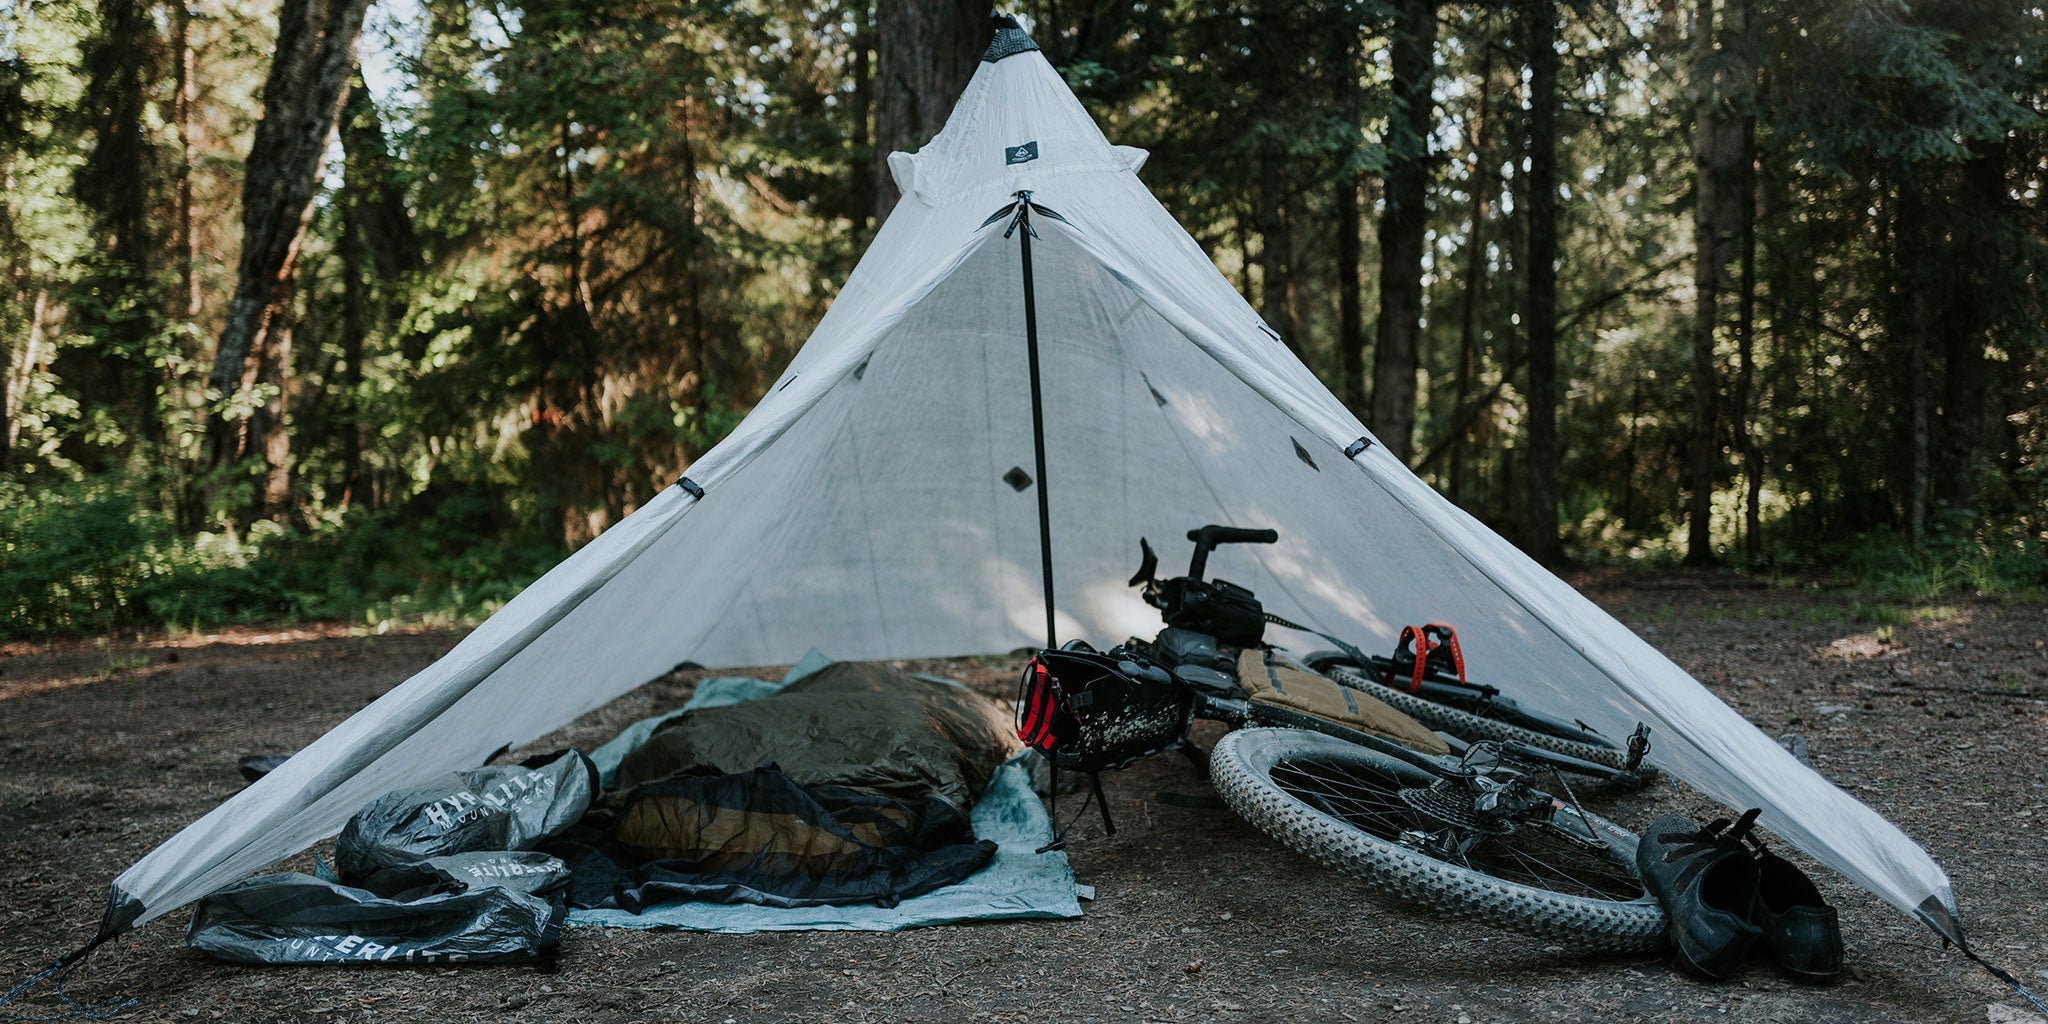 Bike packing gear under a pitched a tent